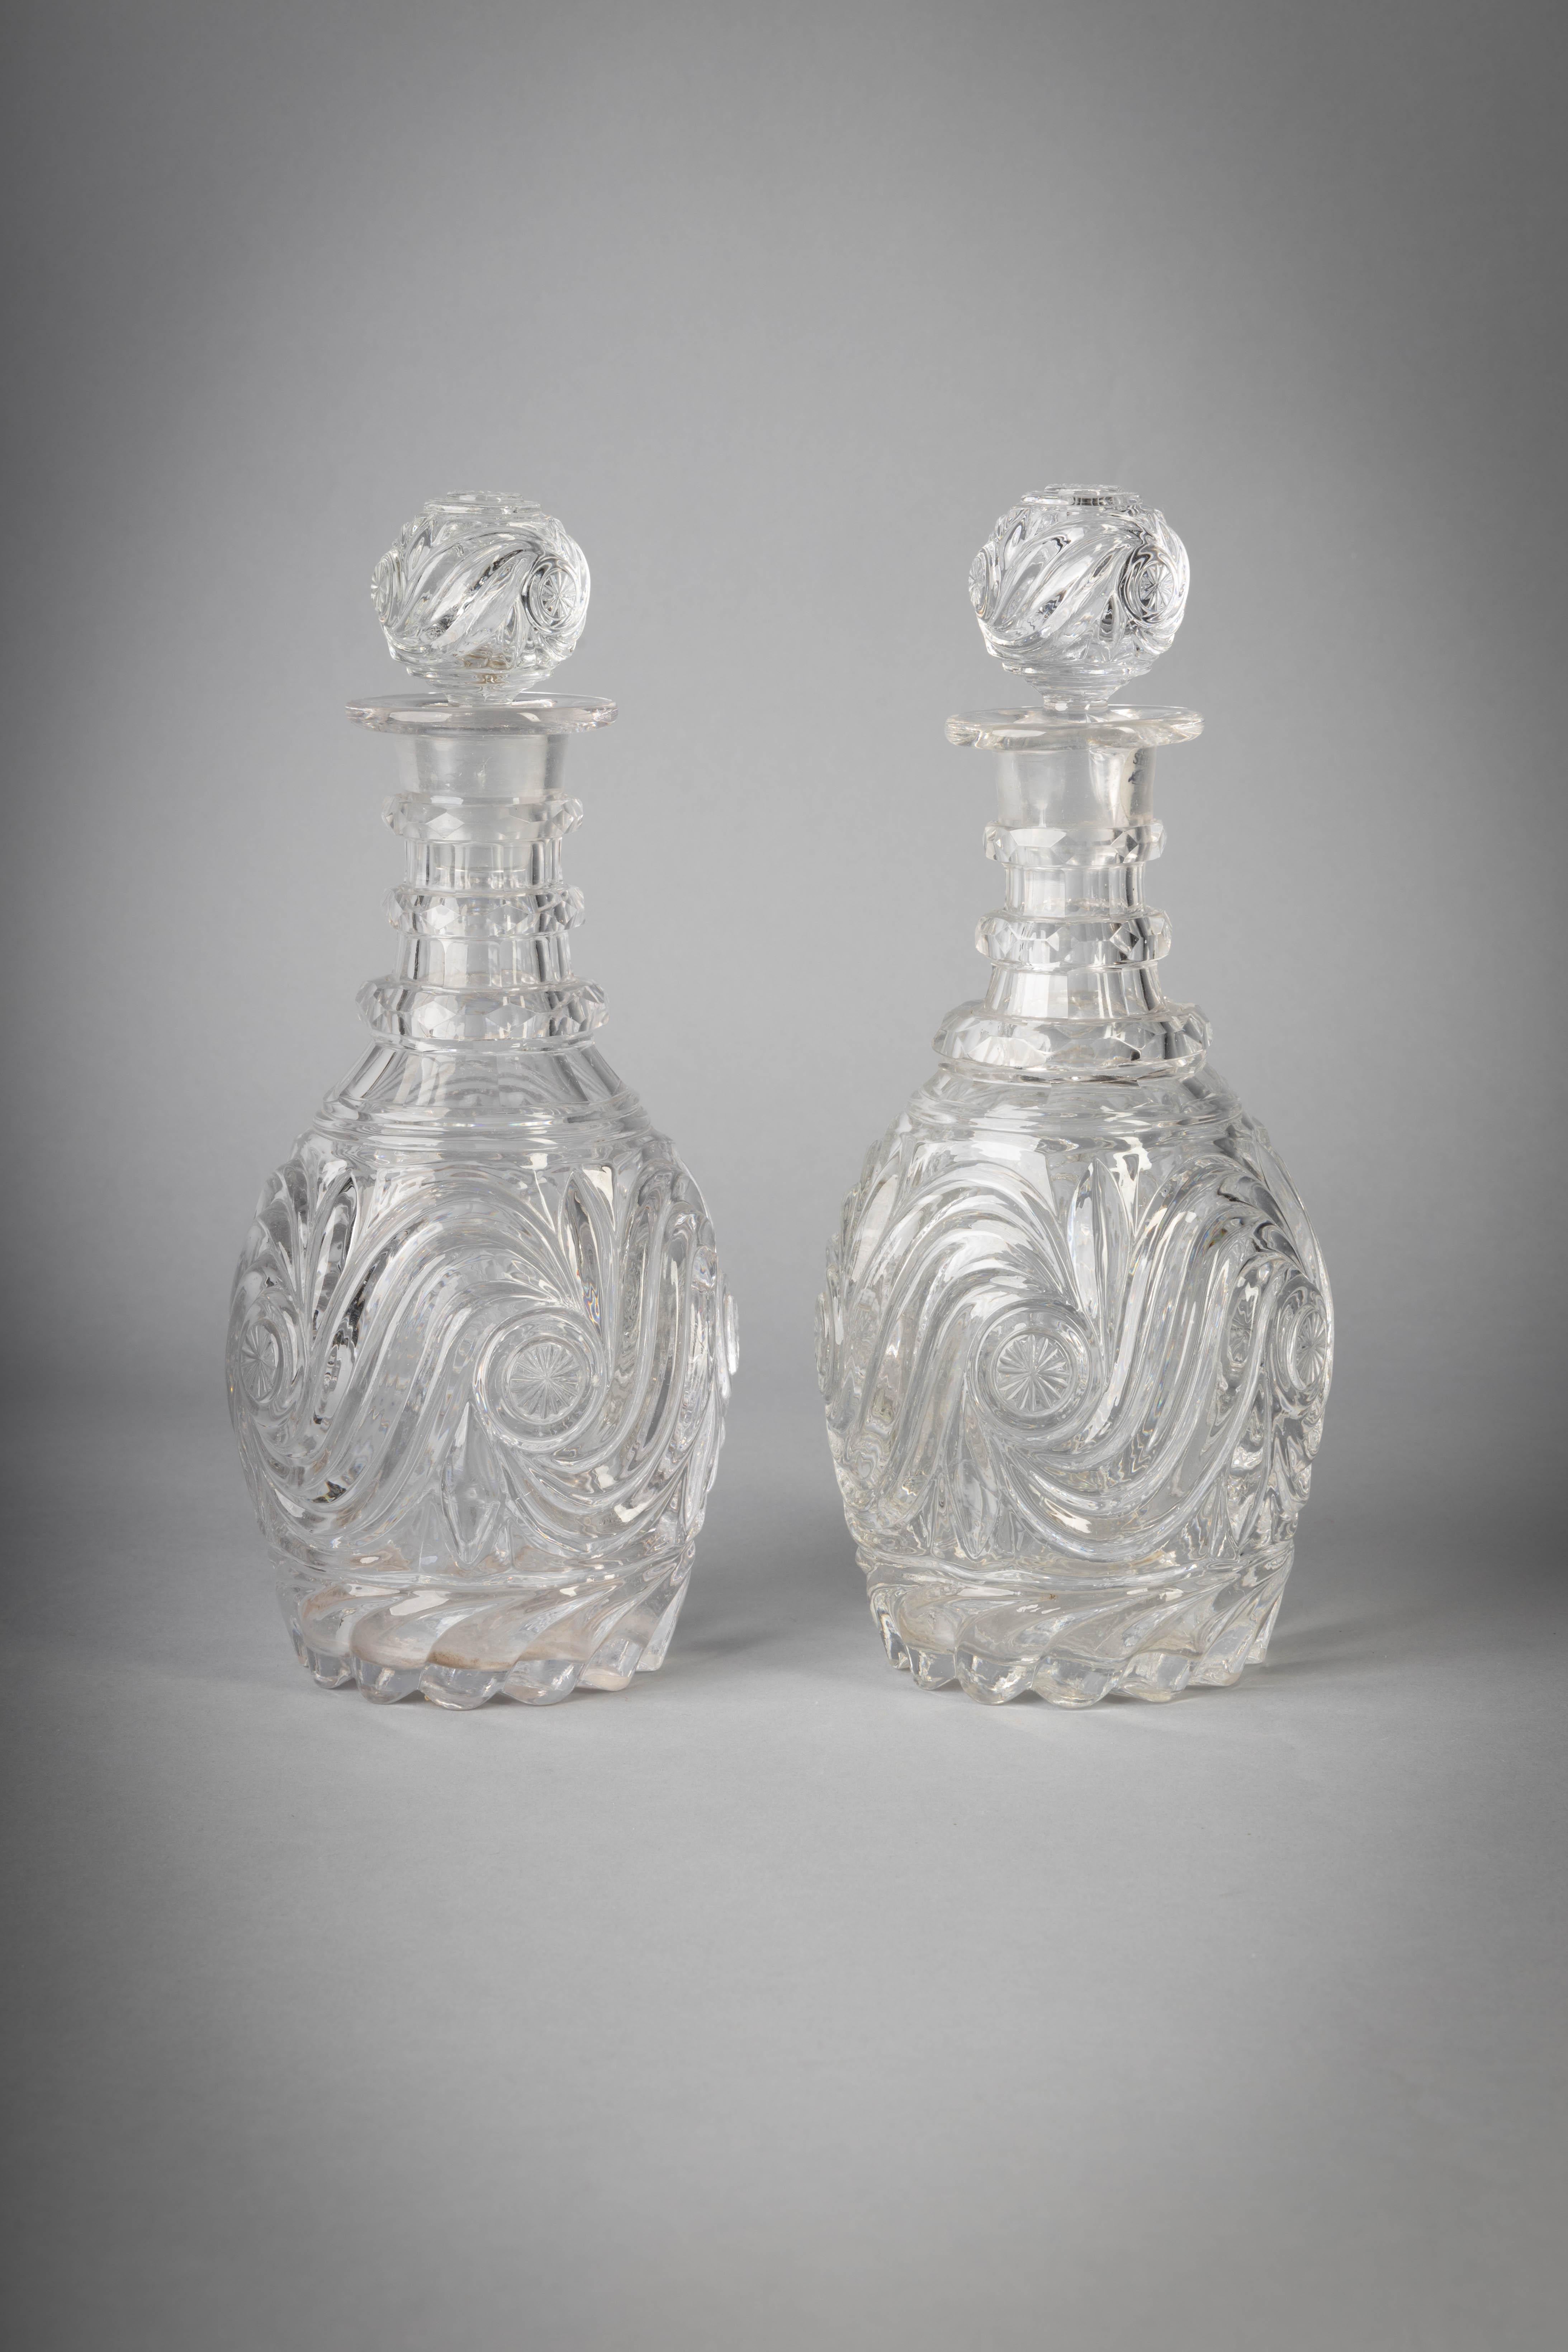 Pair of English Fancy-Cut Glass Decanters, circa 1840 In Good Condition For Sale In New York, NY